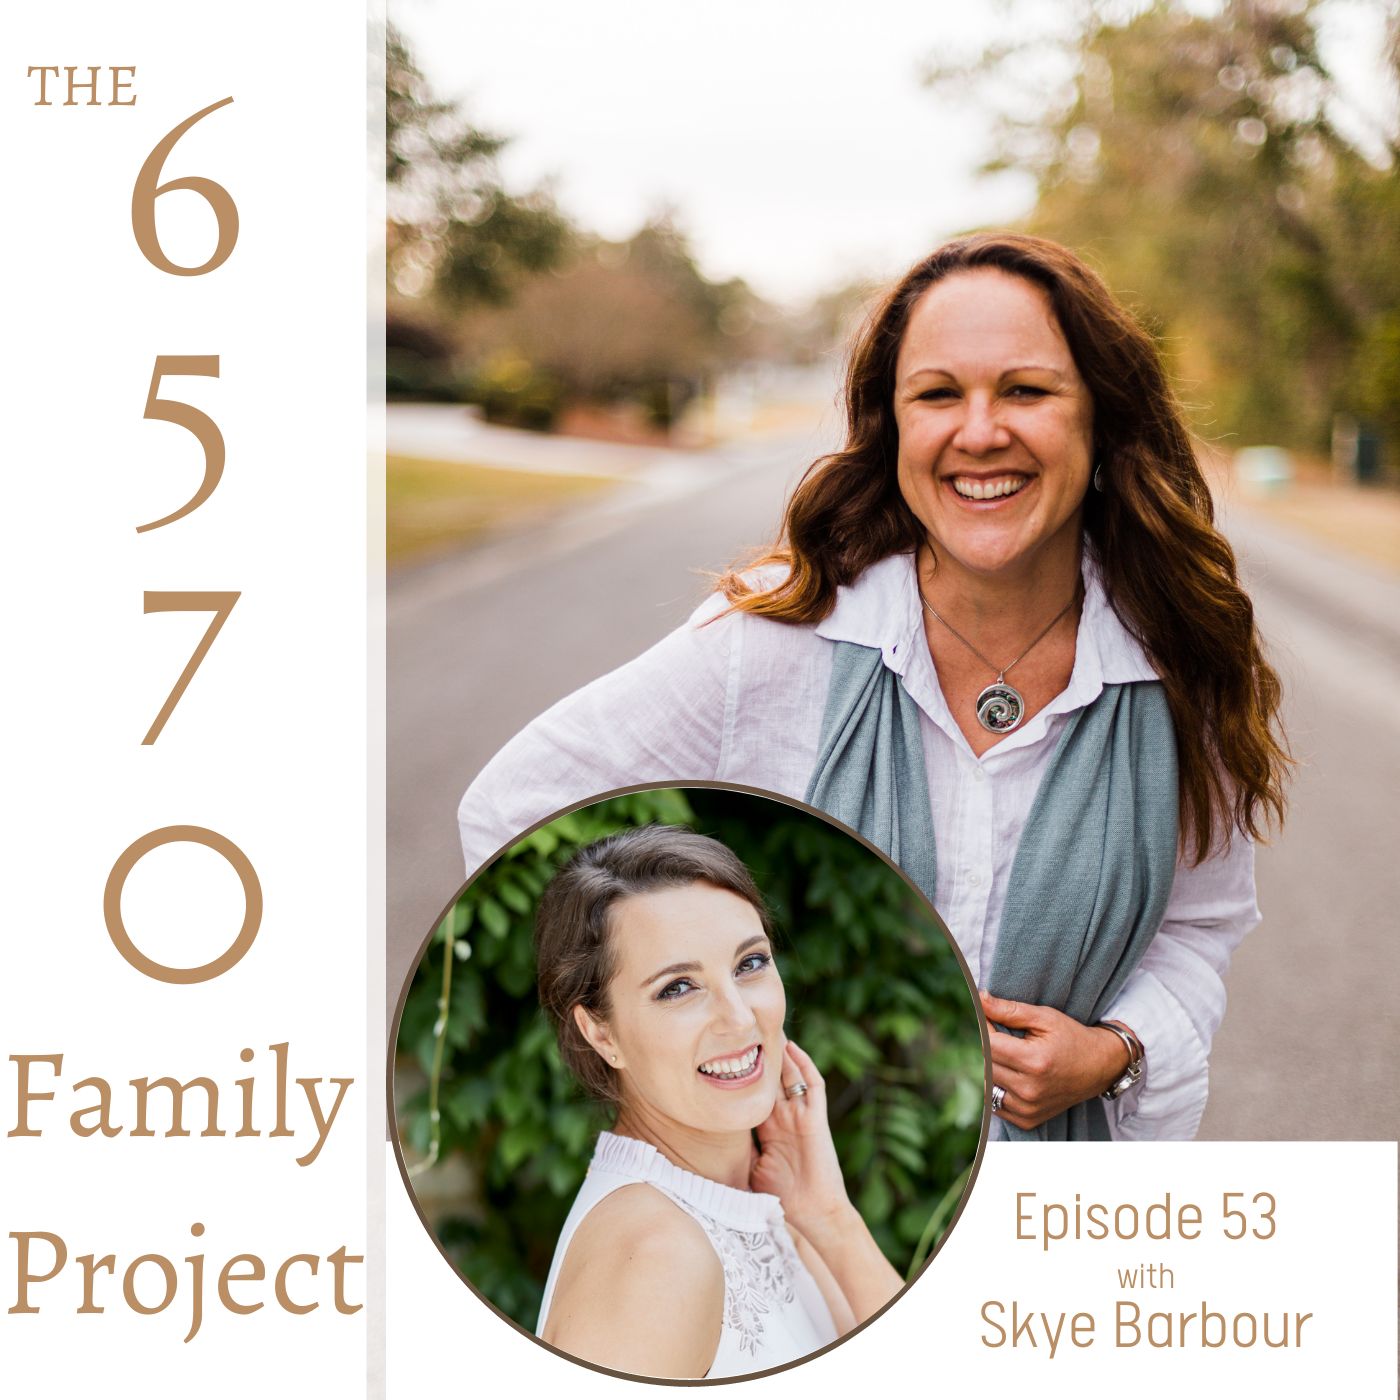 Artwork for podcast The 6570 Family Project